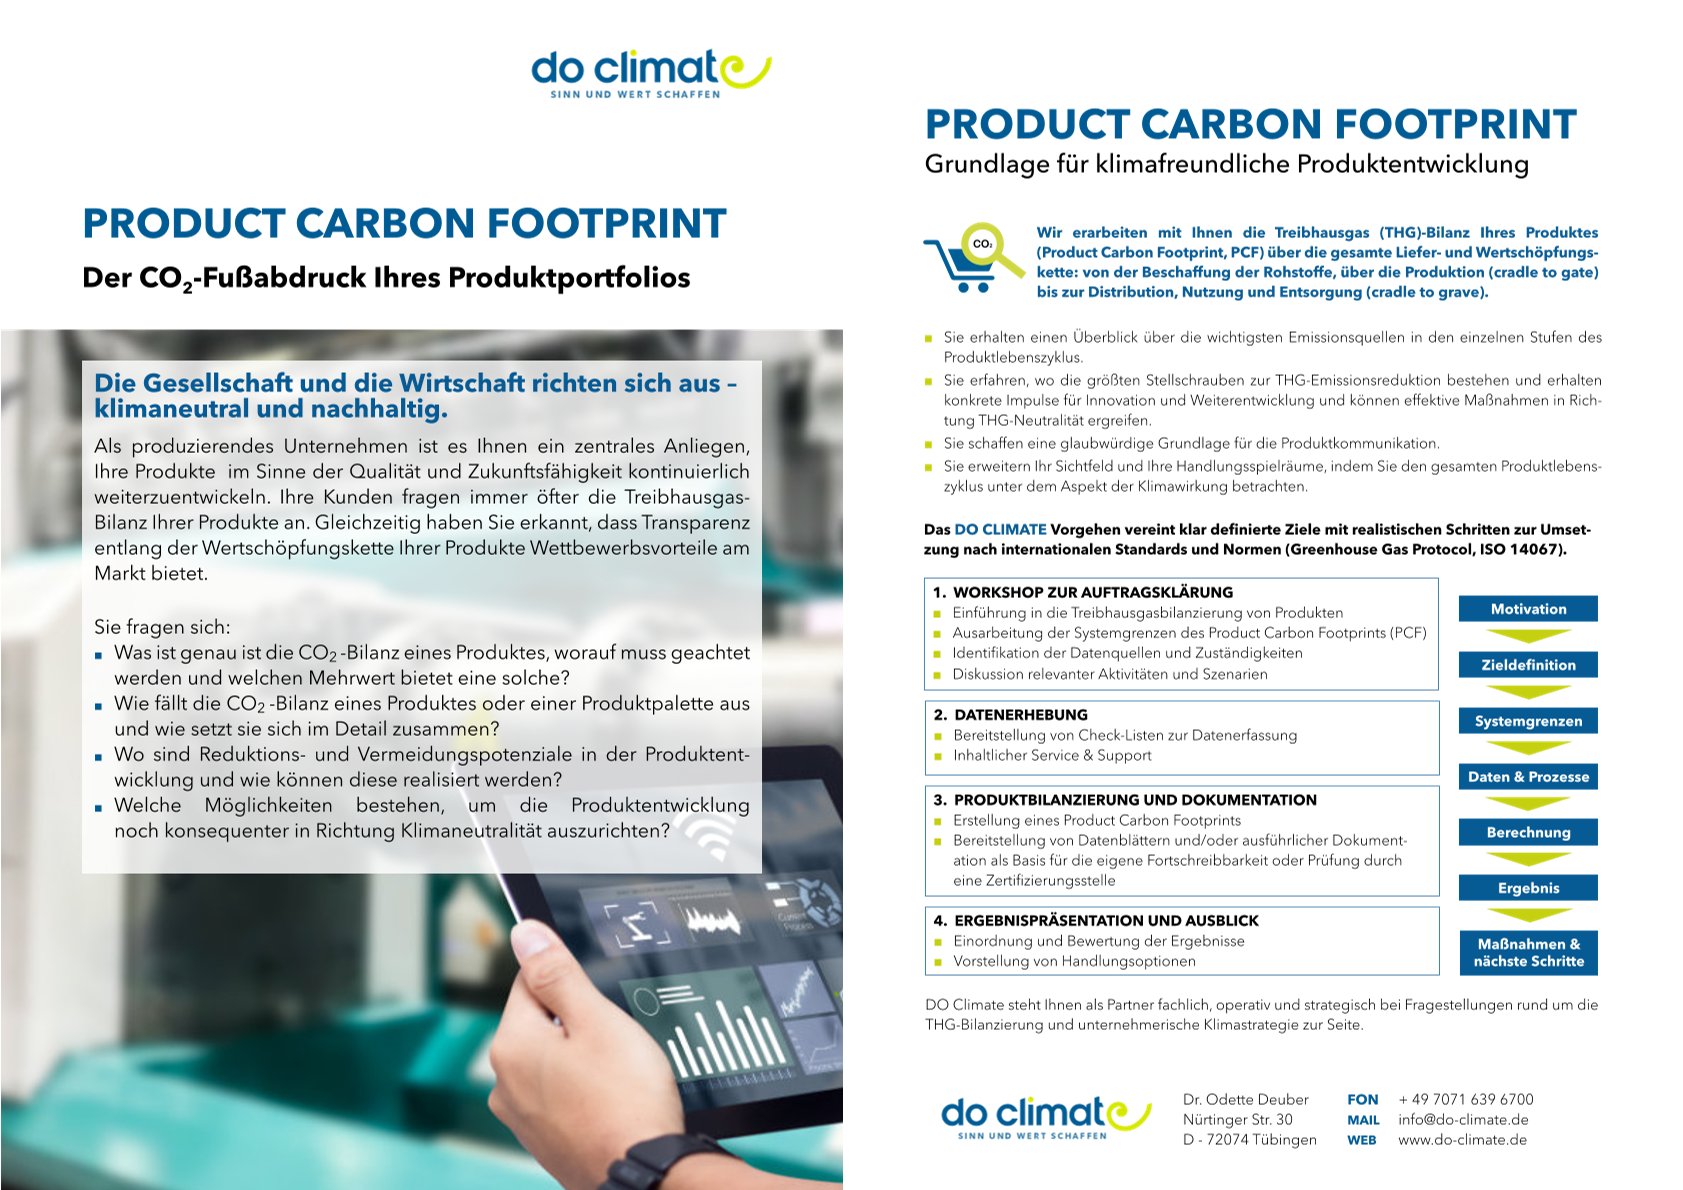 Product sheet on the product carbon footprint 